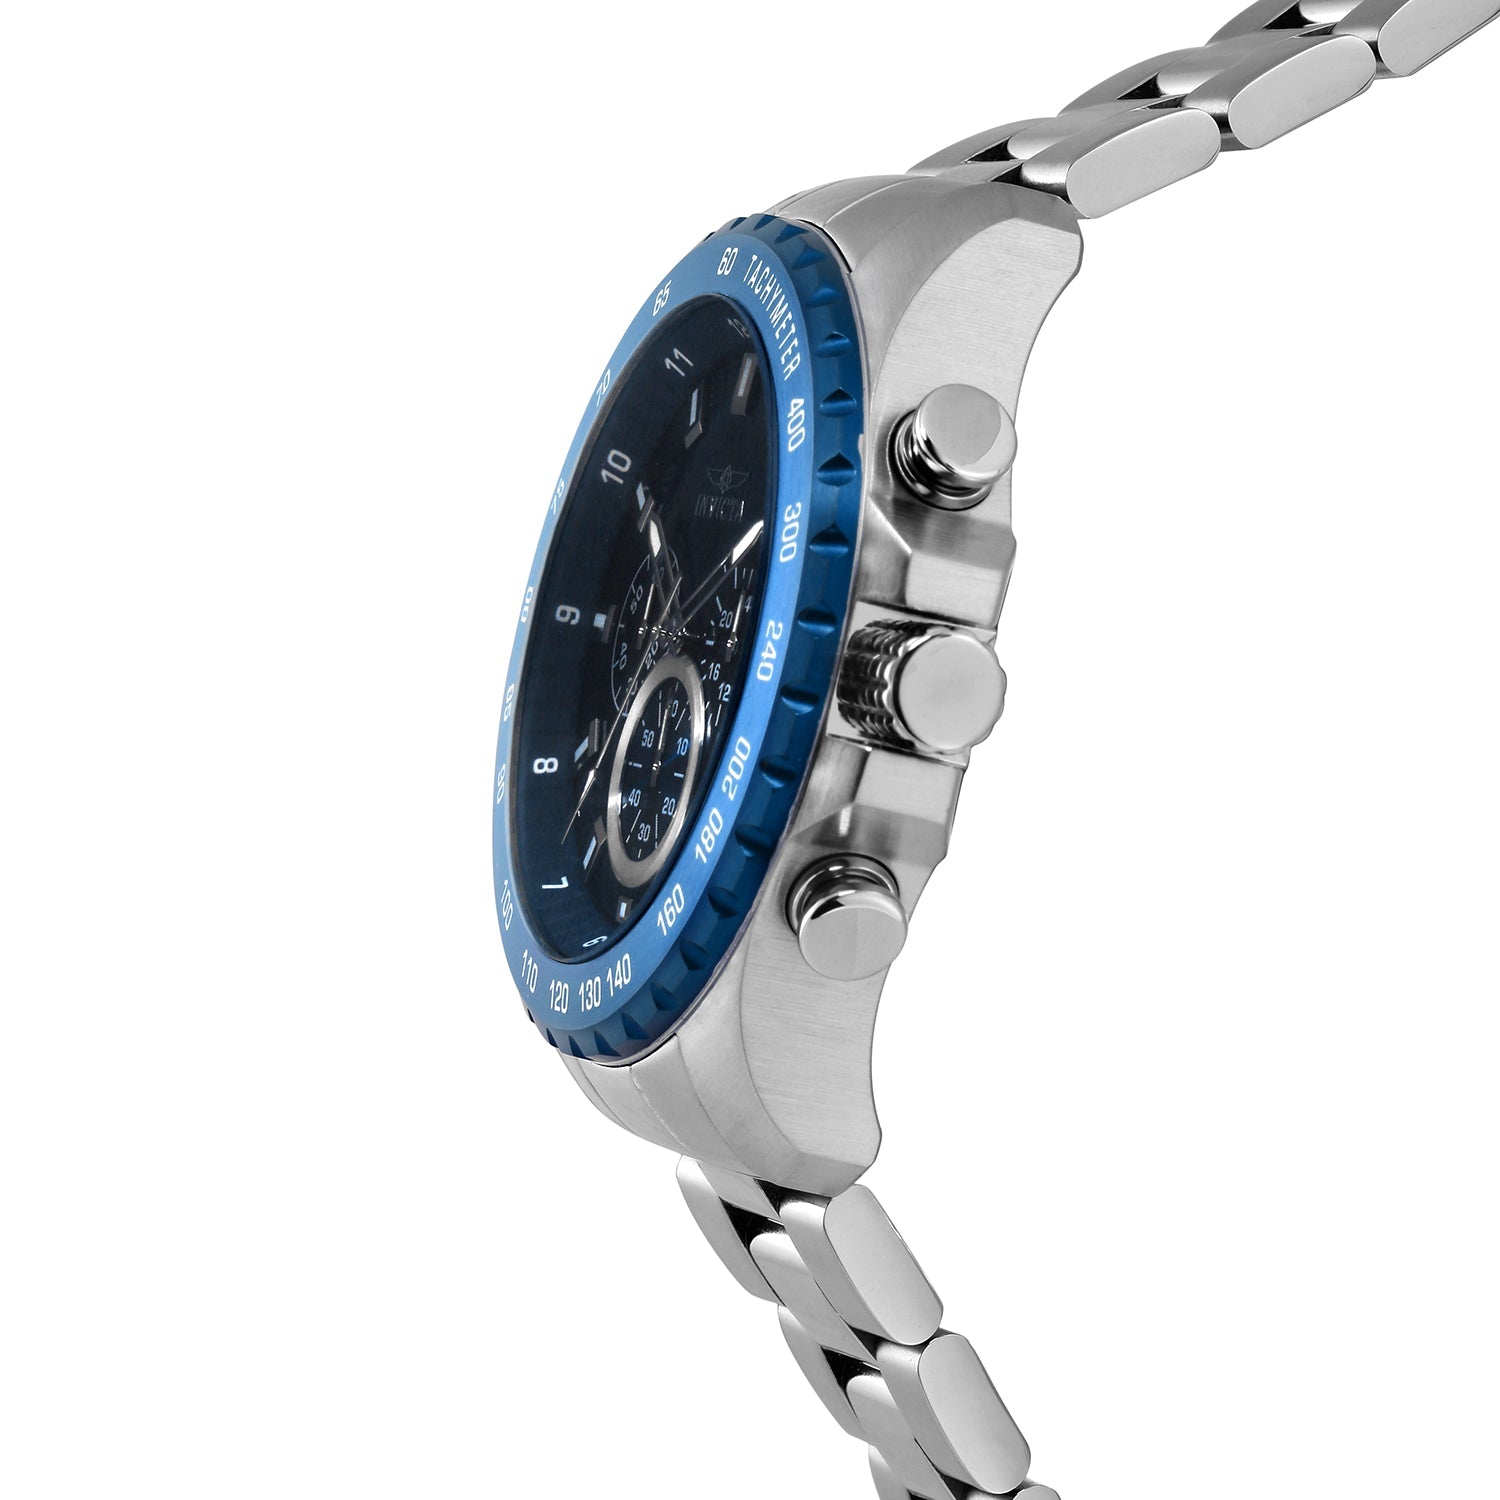 Side view of Invicta Speedway 24212 quartz watch with blue details on stainless steel band